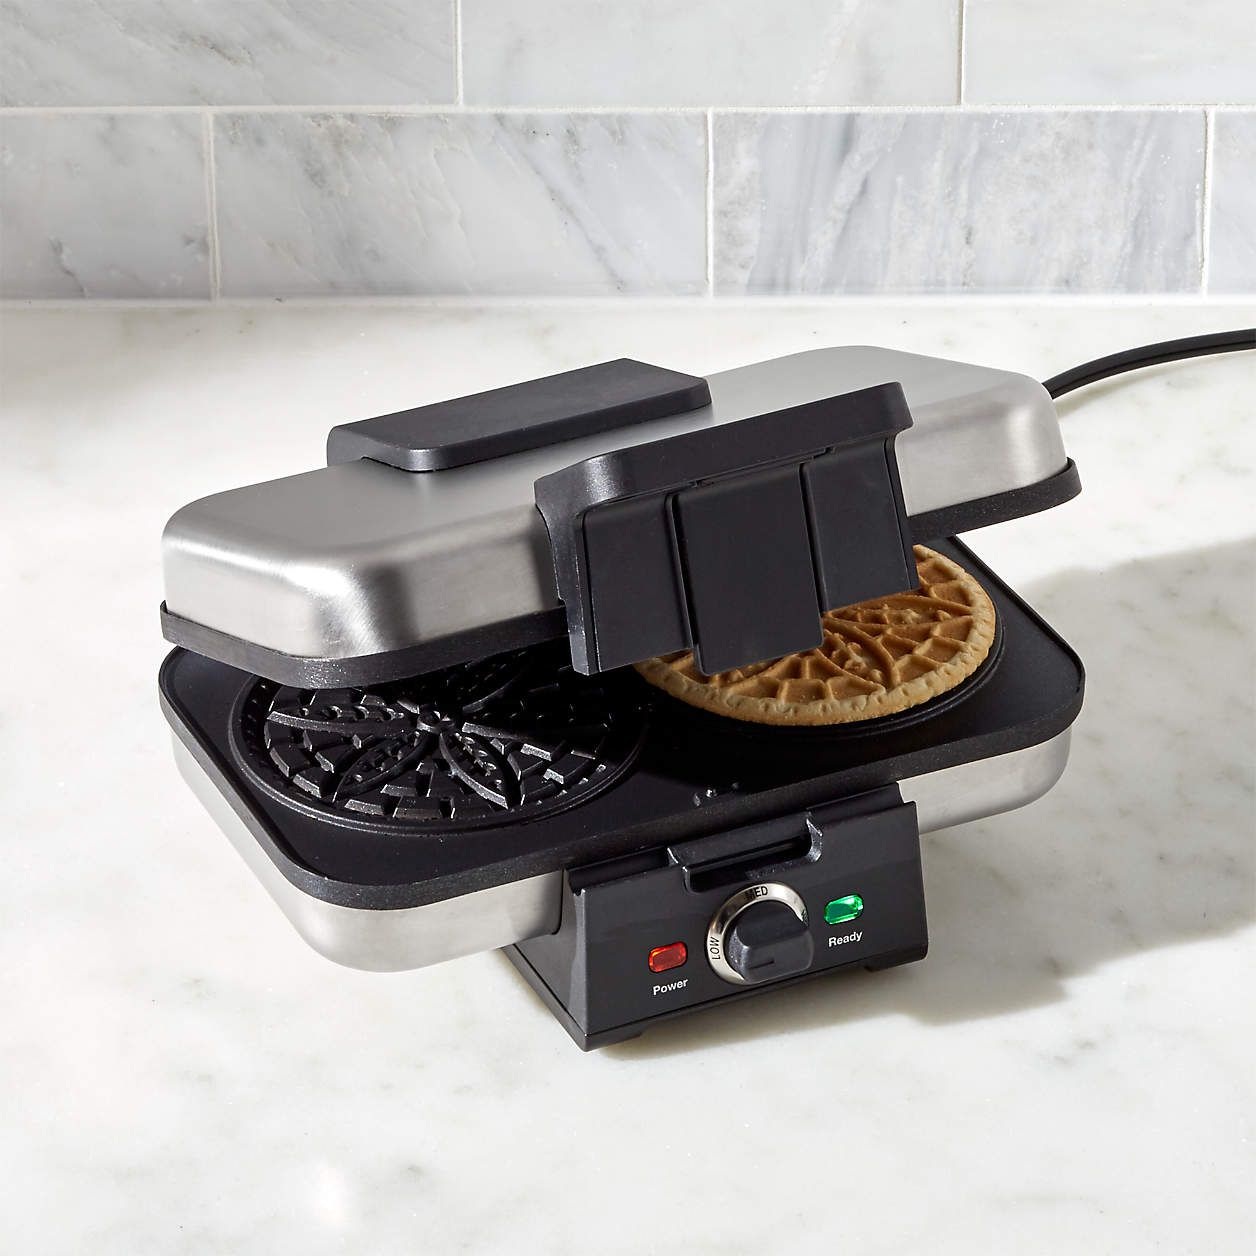 pizzelle maker with one pizzelle on countertop